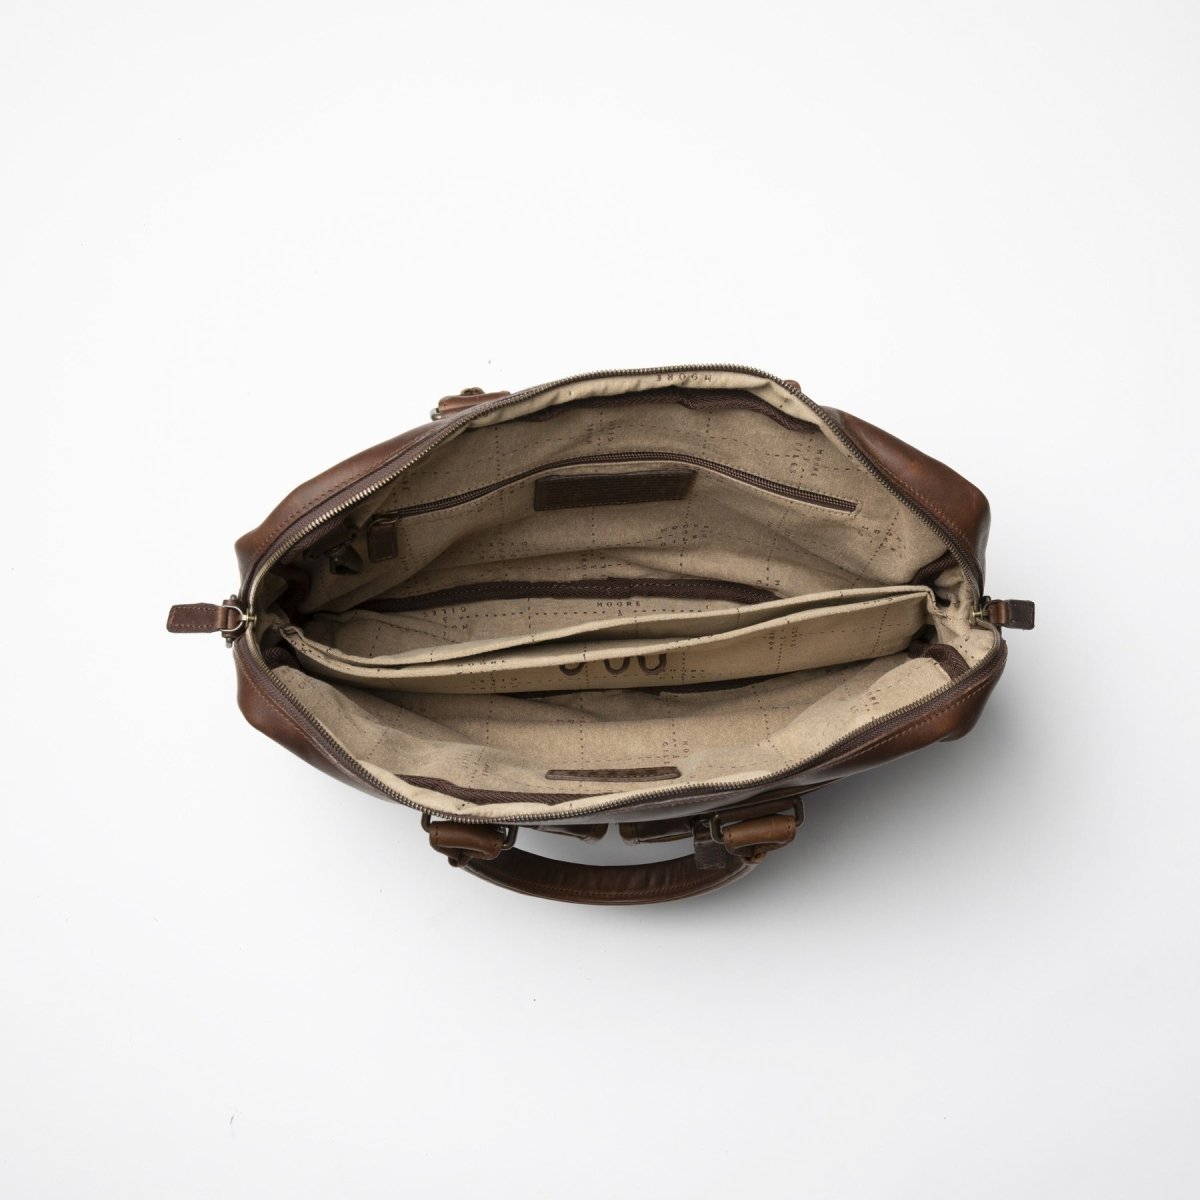 Haythe Commuter Bag - Leather Briefcase by Moore & Giles